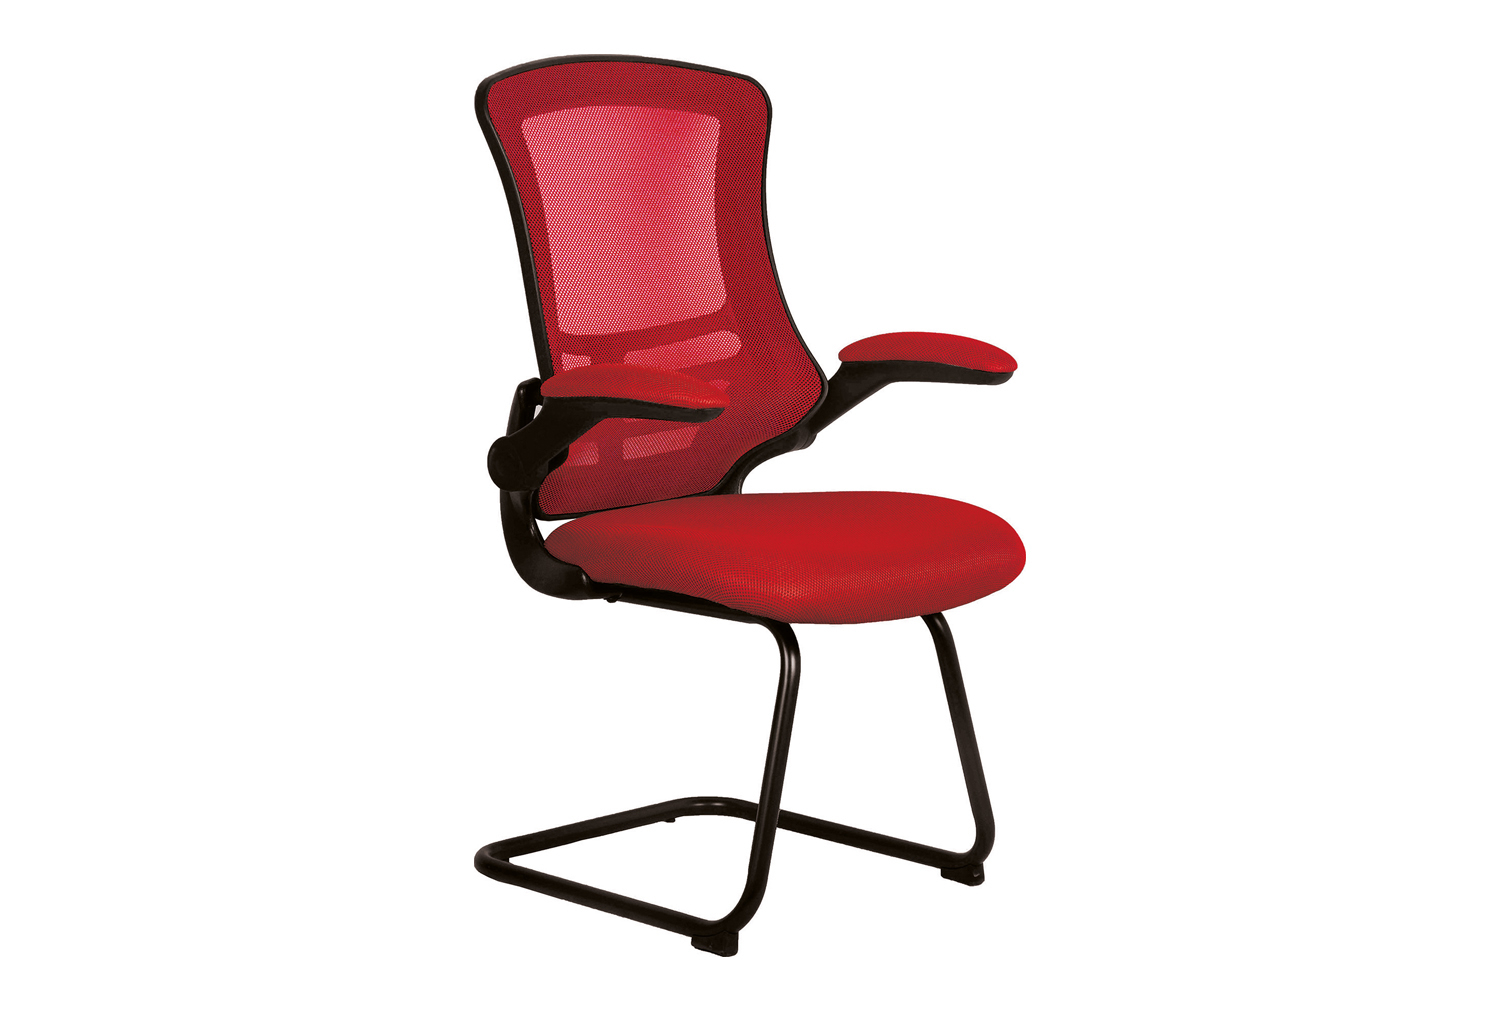 Moon Mesh Back Cantilever Office Chair With Black Frame (Red), Fully Installed